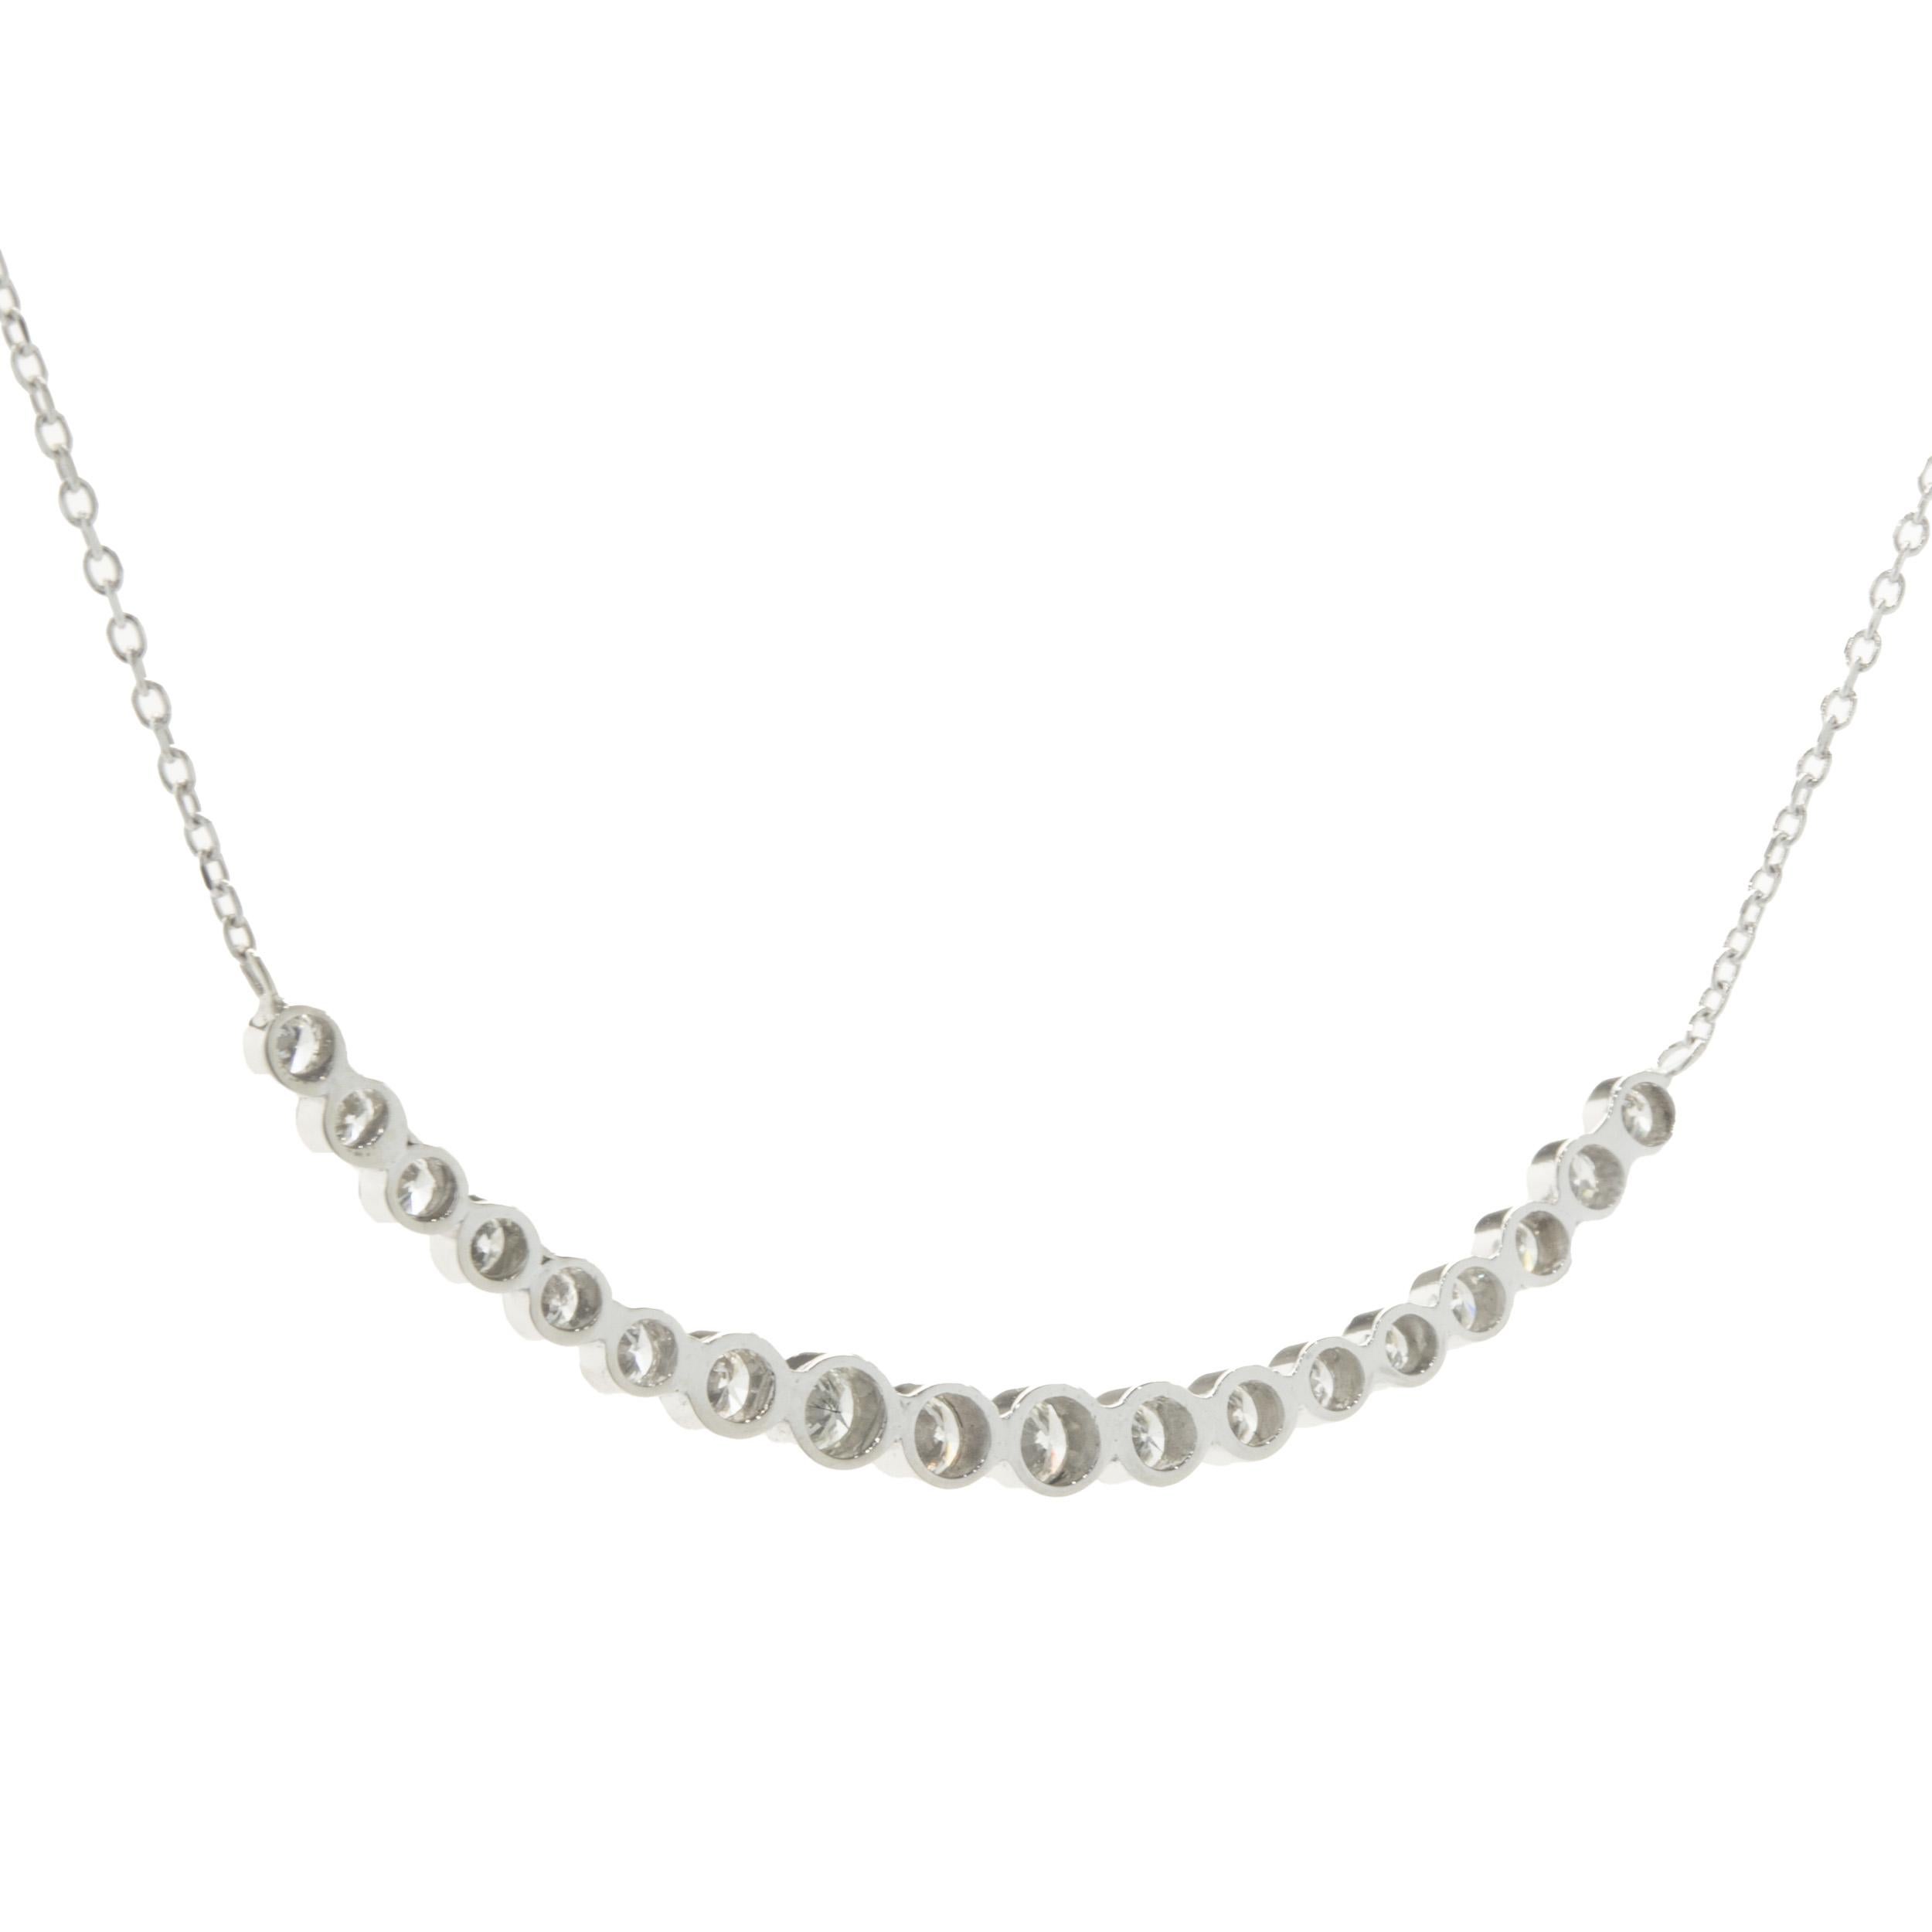 Designer: custom design
Material: 14K white gold
Diamond: 19 round brilliant cut = 0.54cttw
Color: H / I
Clarity: VS1-2
Dimensions: necklace measures 18-inches in length 
Weight: 2.66 grams